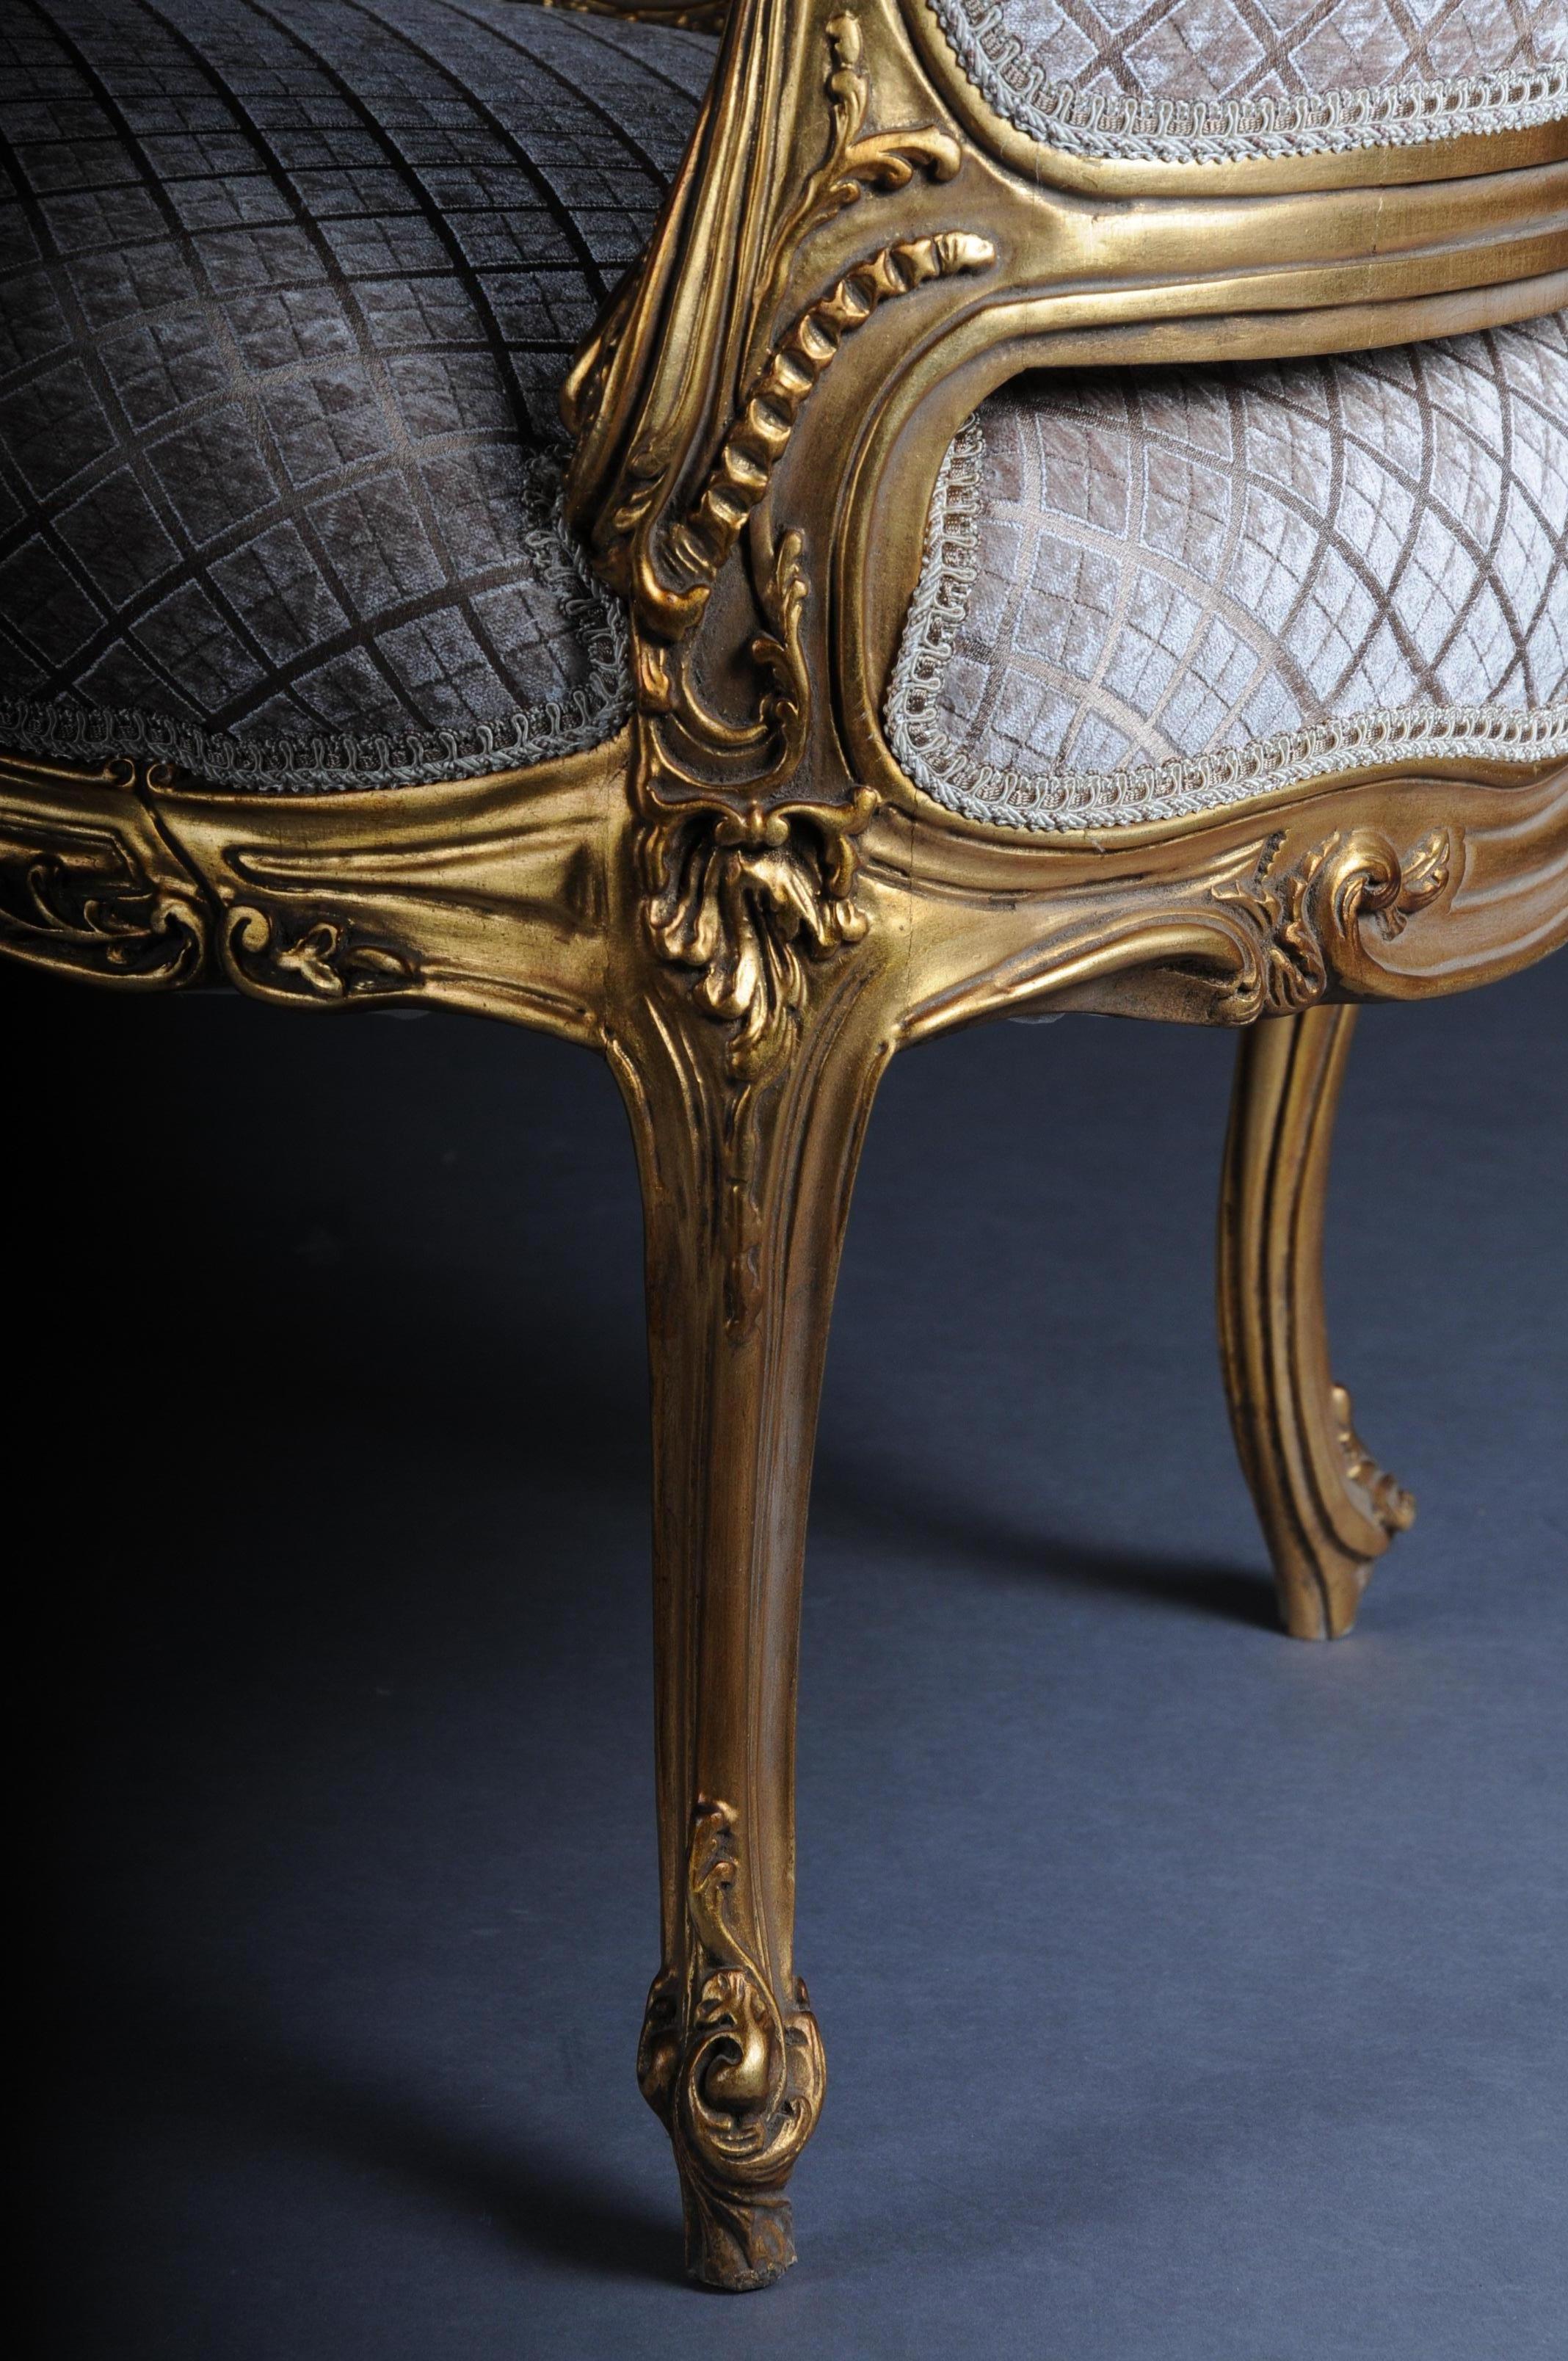 French Luxurious Sofa, Canapé, Couch in Rococo or Louis XV Style